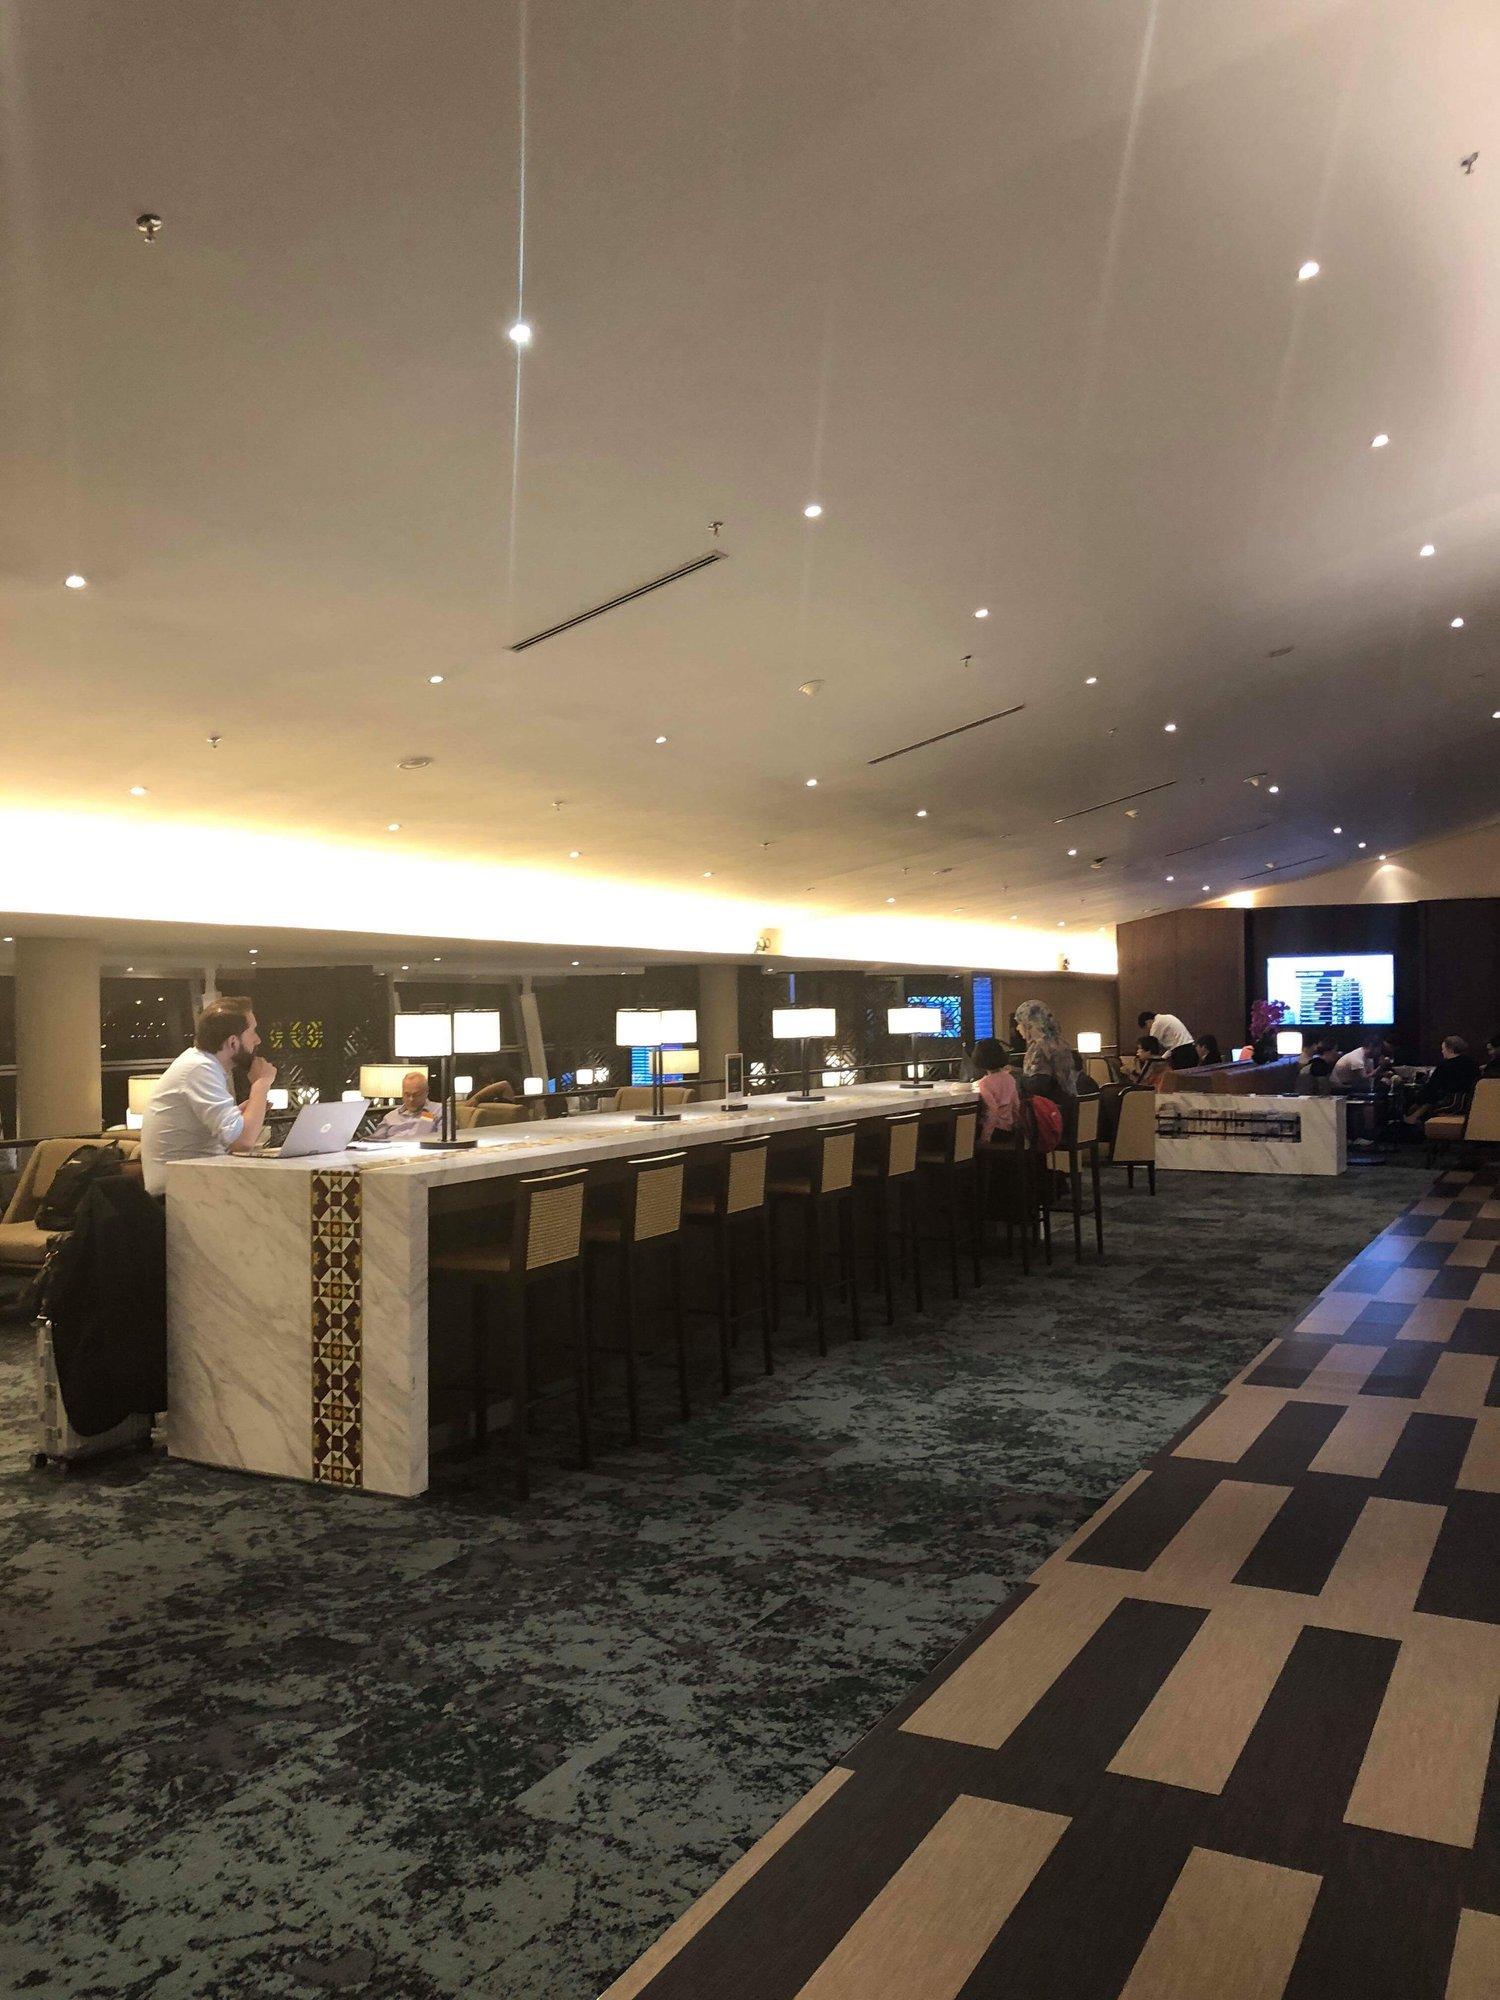 Malaysia Airlines Golden Business Class Lounge image 1 of 27